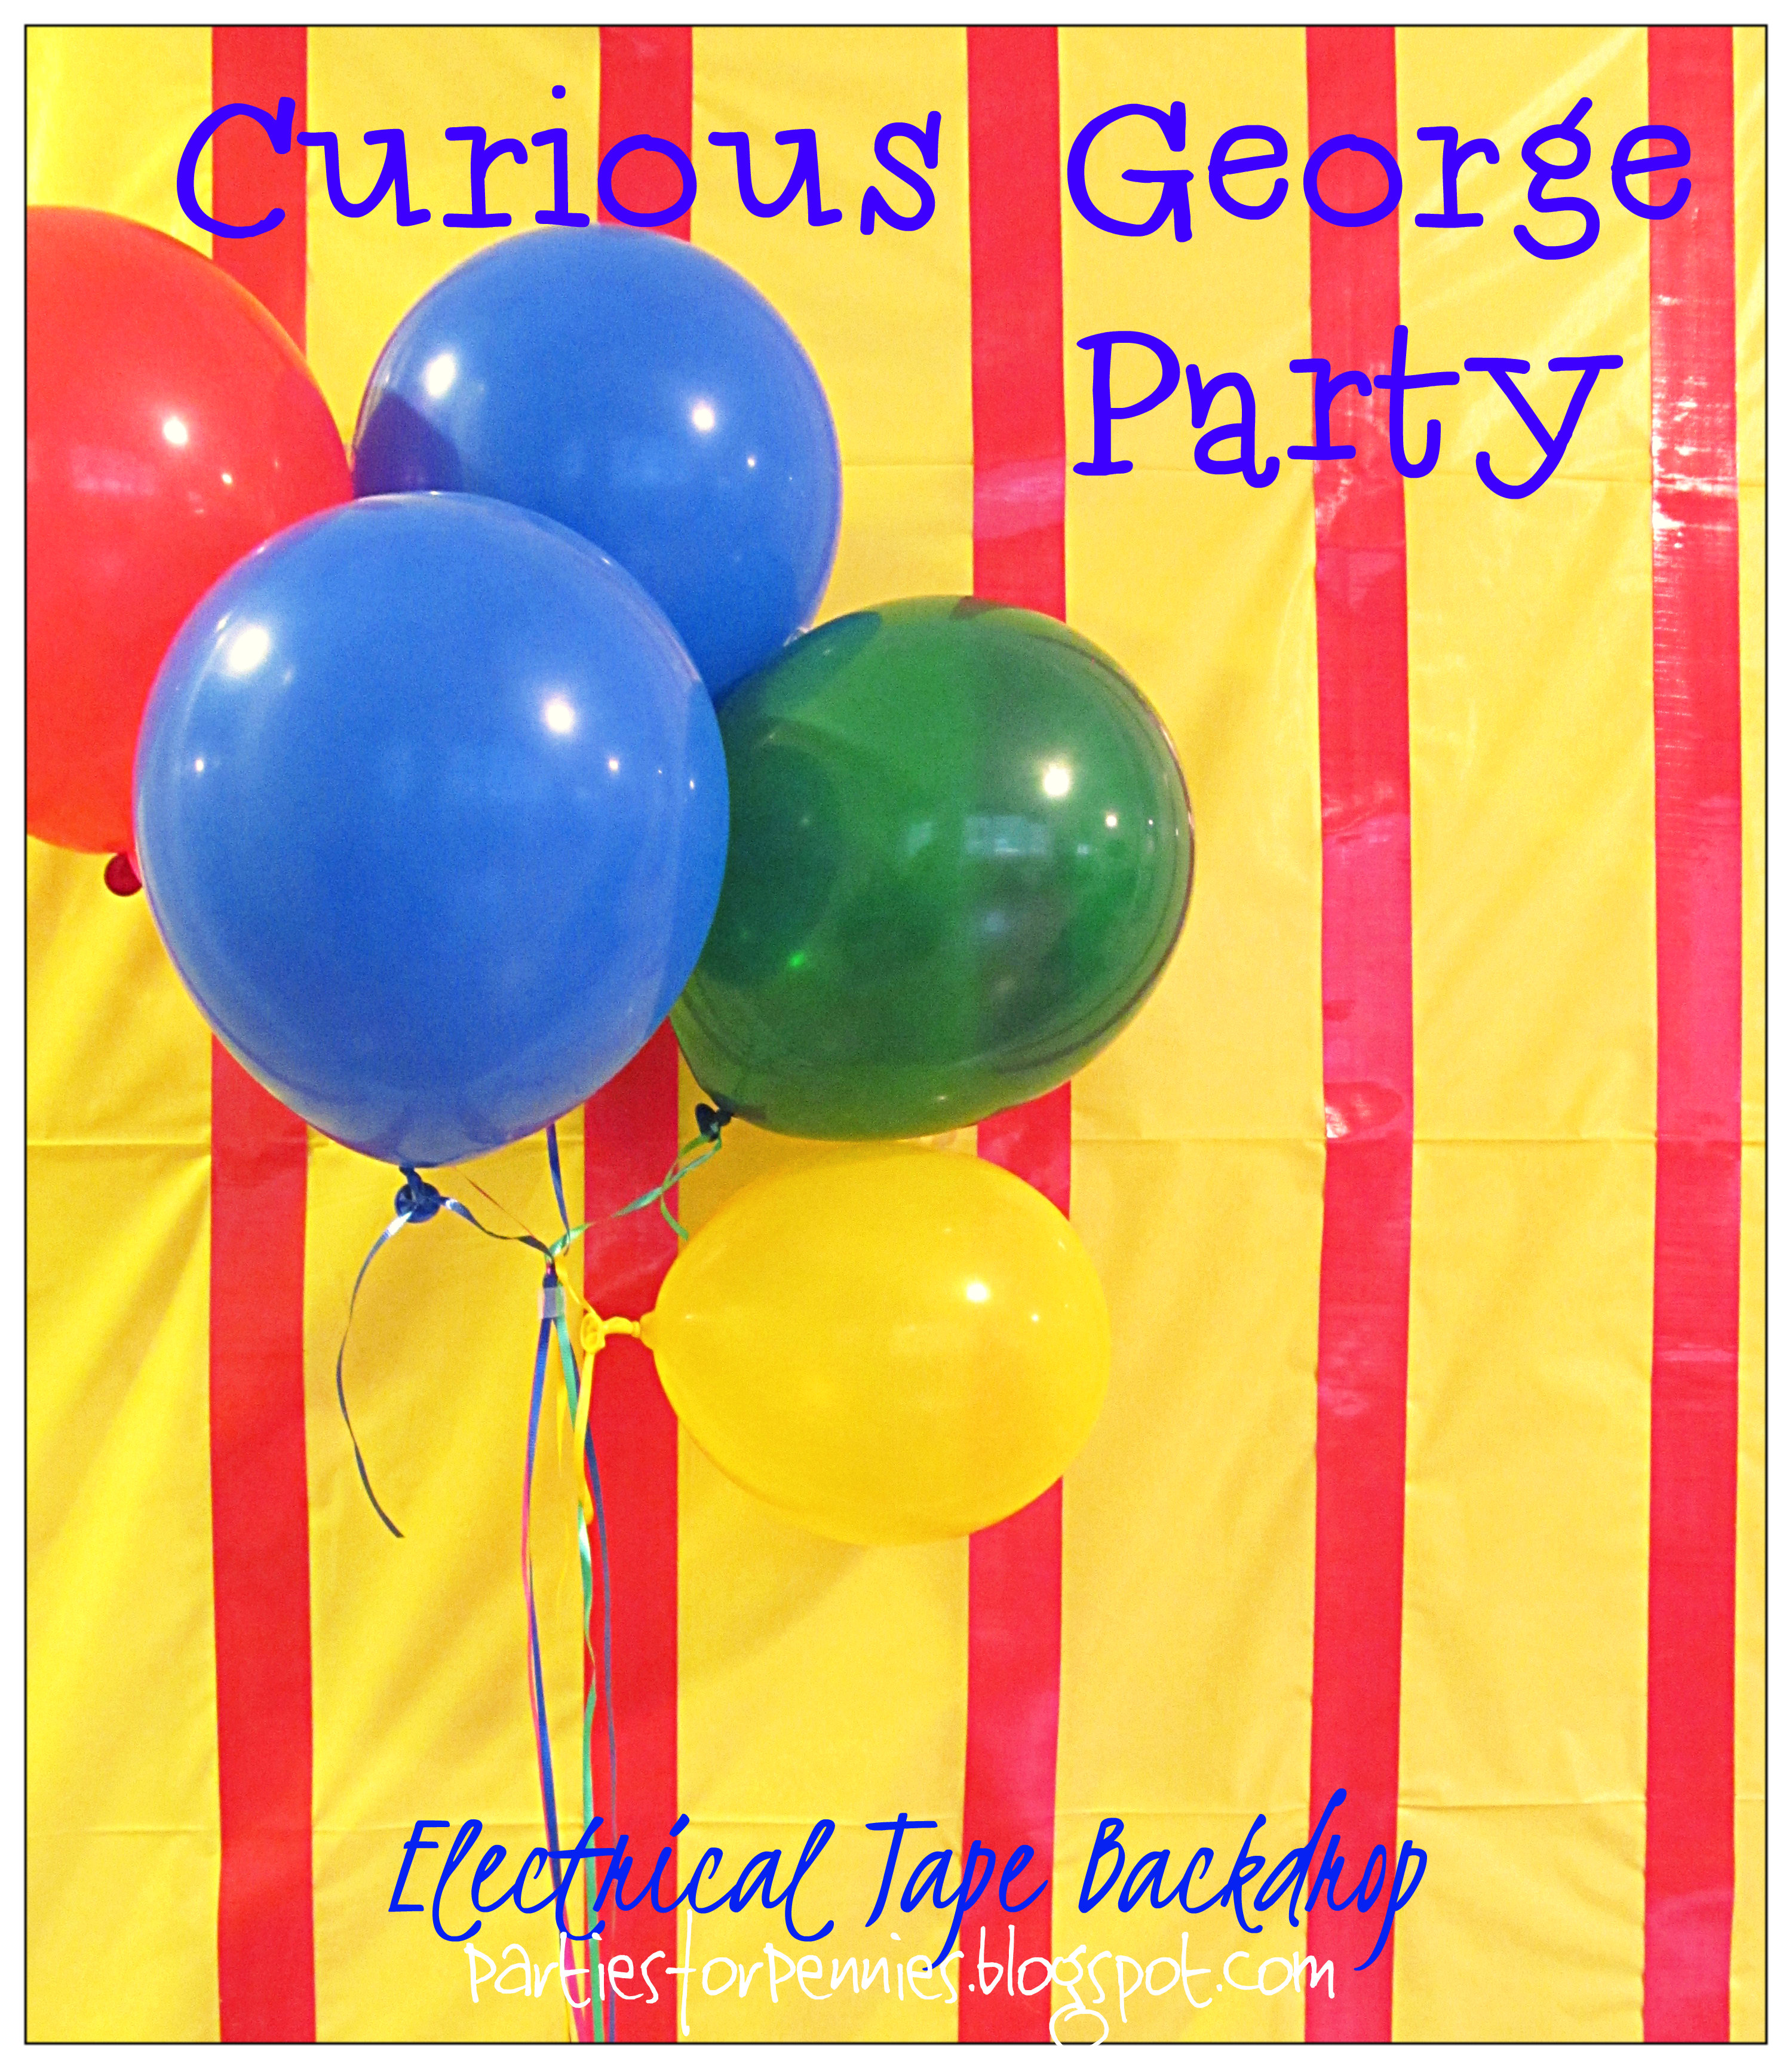 Curious George Backdrop by PartiesforPennies.com